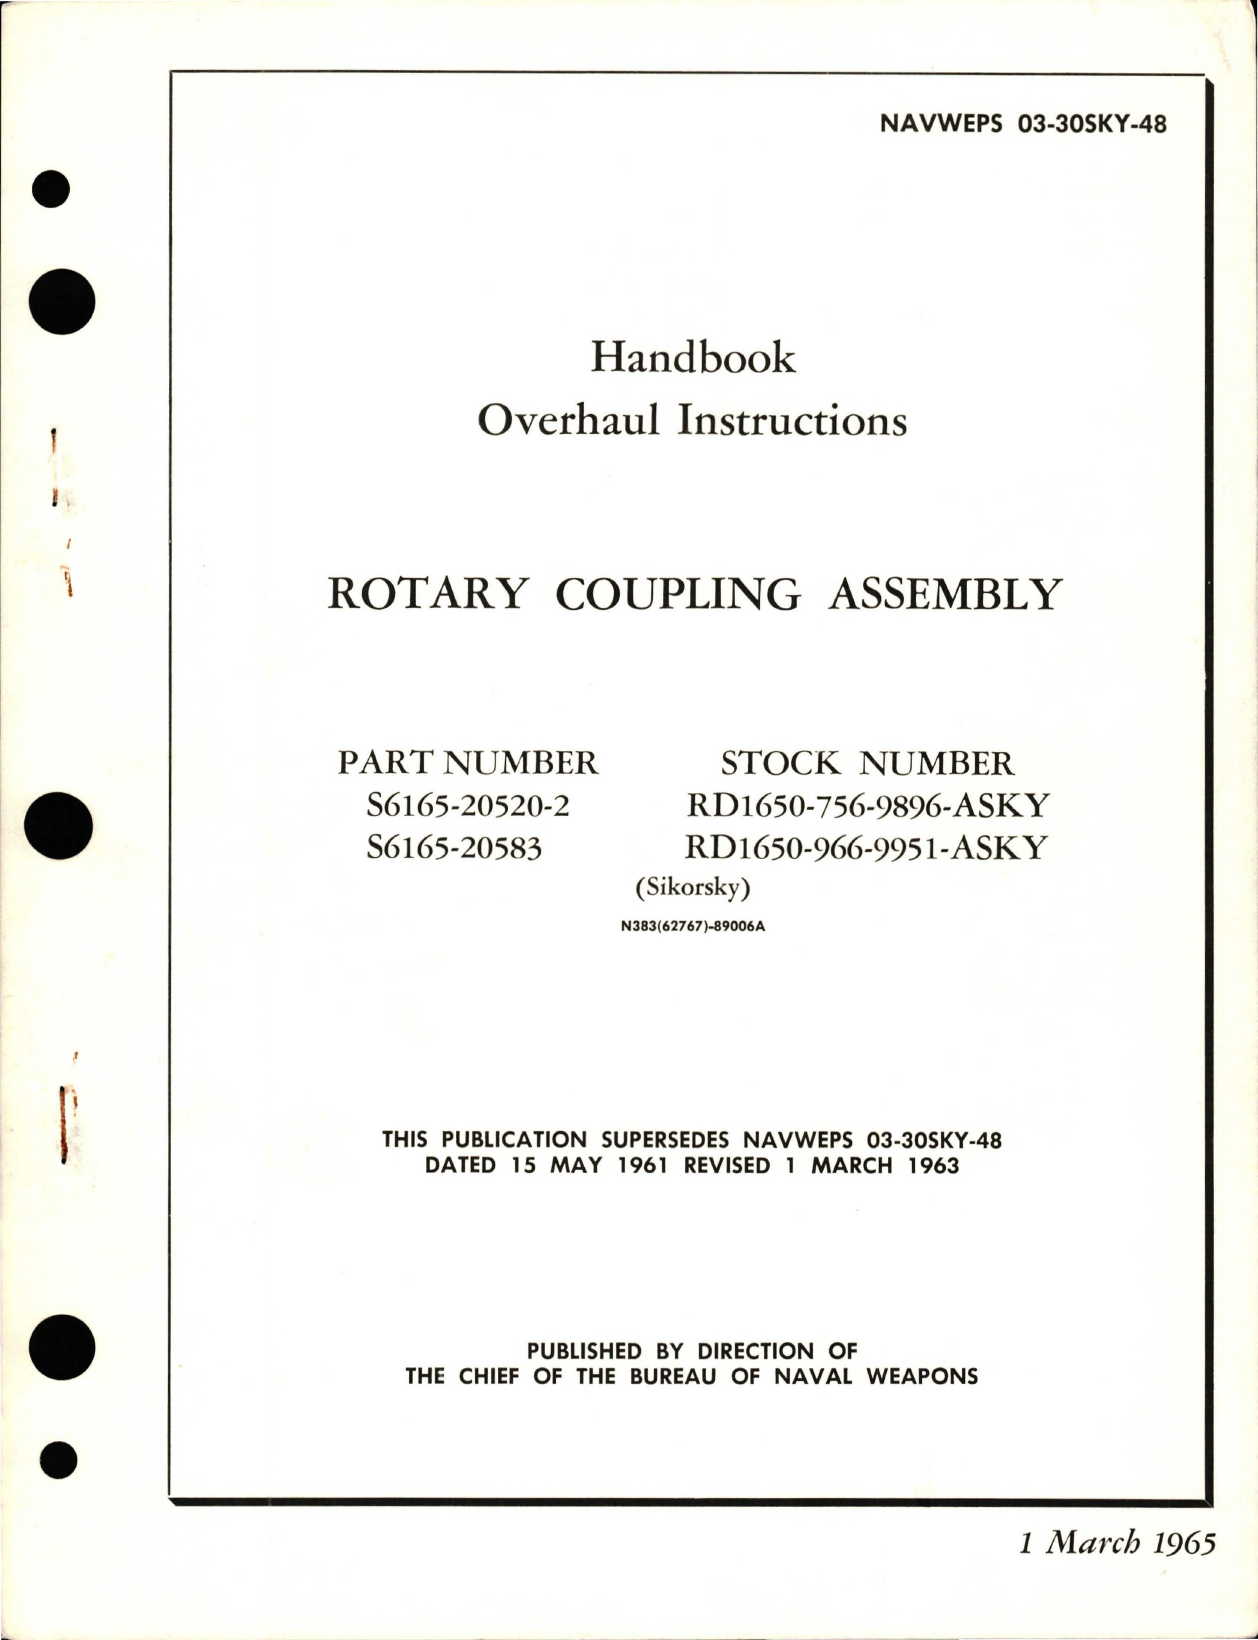 Sample page 1 from AirCorps Library document: Overhaul Instructions for Rotary Coupling Assembly - Parts S6165-20520-2 and S6165-20583 